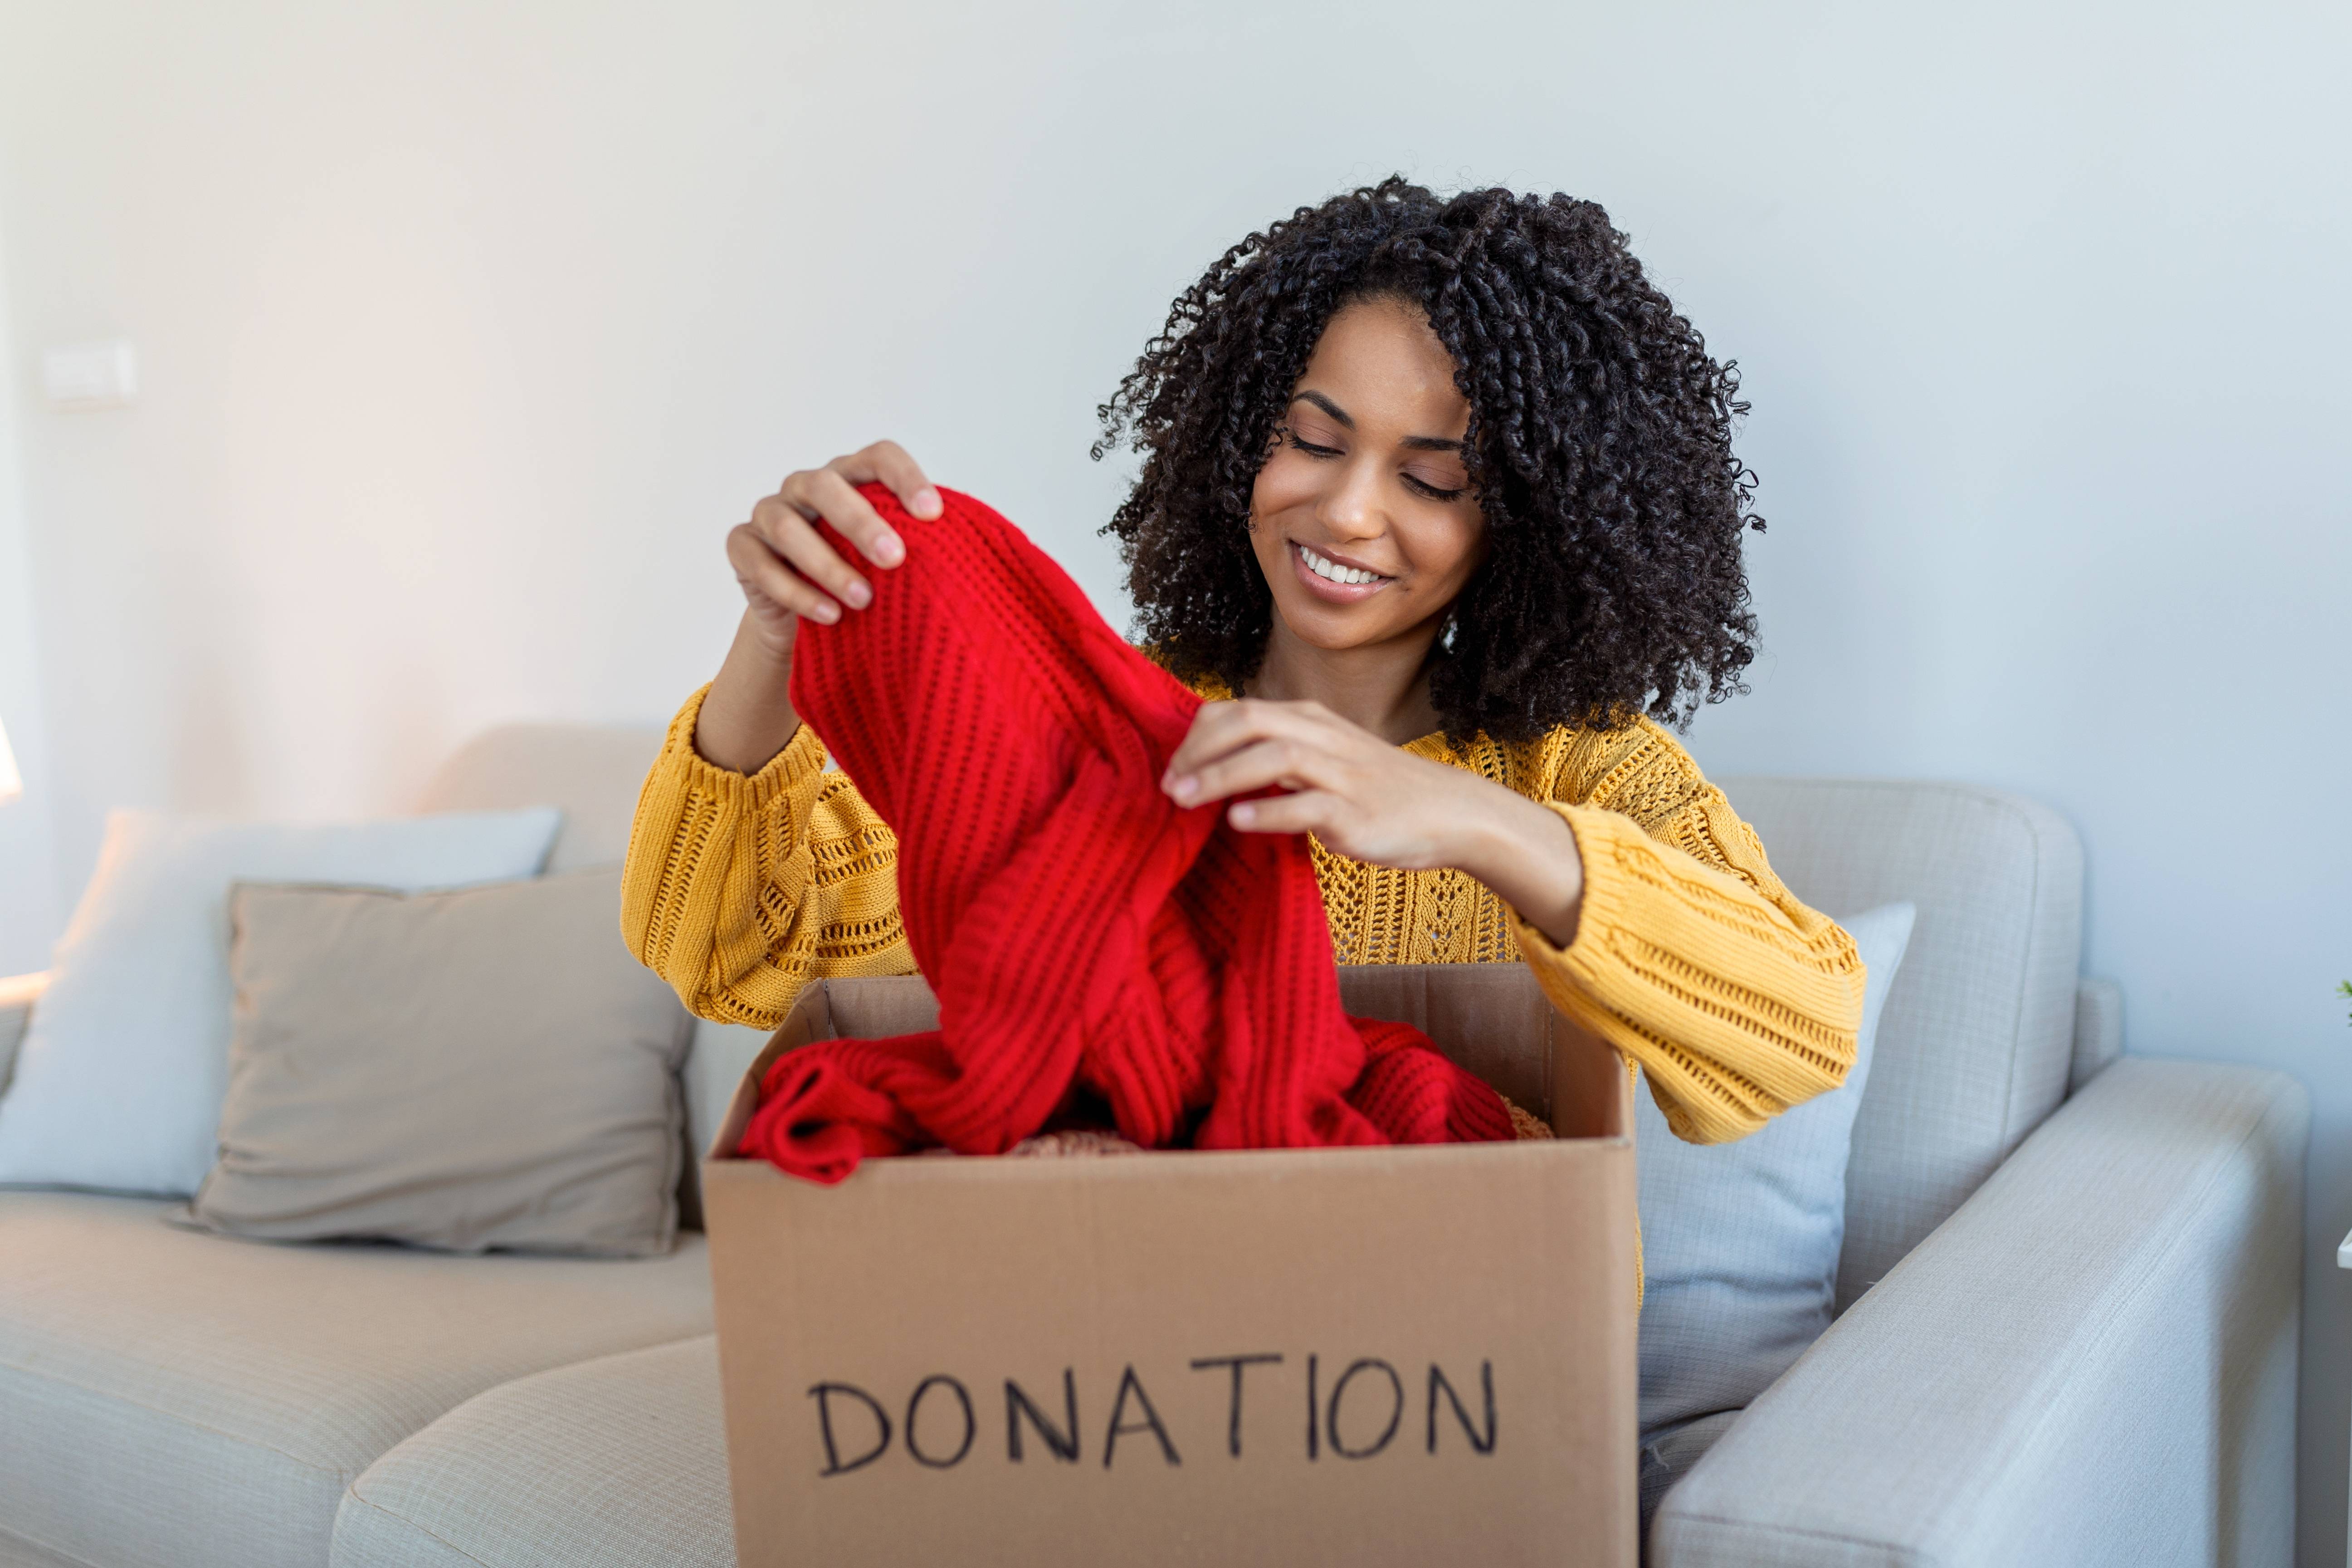 A generous woman donates her red sweater to a local charity.